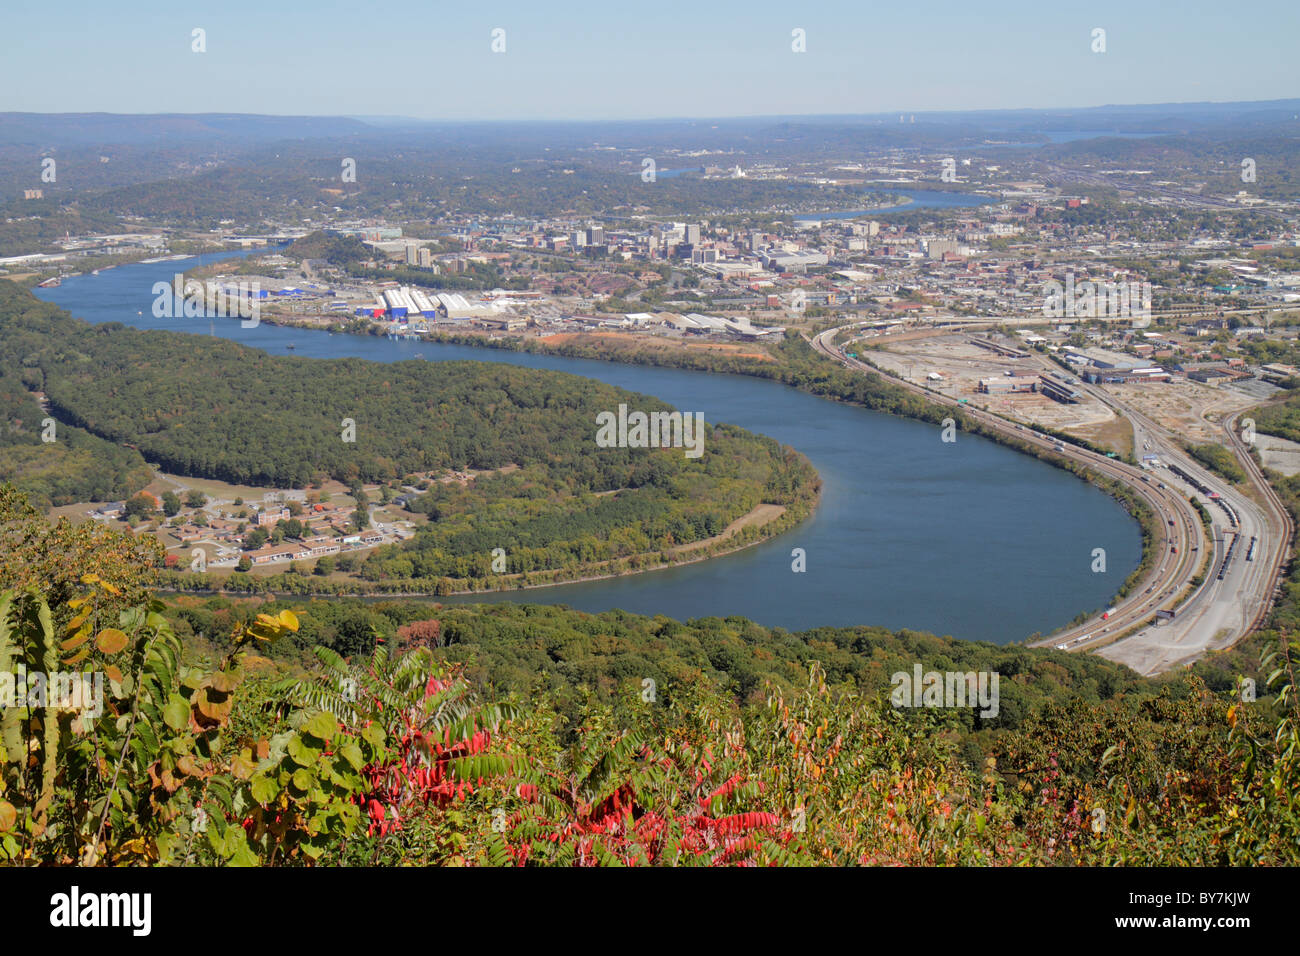 Tennessee Chattanooga, Lookout Mountain, Point Park, National Military Park, Civil War Battleground, fiume Tennessee, vista panoramica, vista aerea dall'alto fr Foto Stock